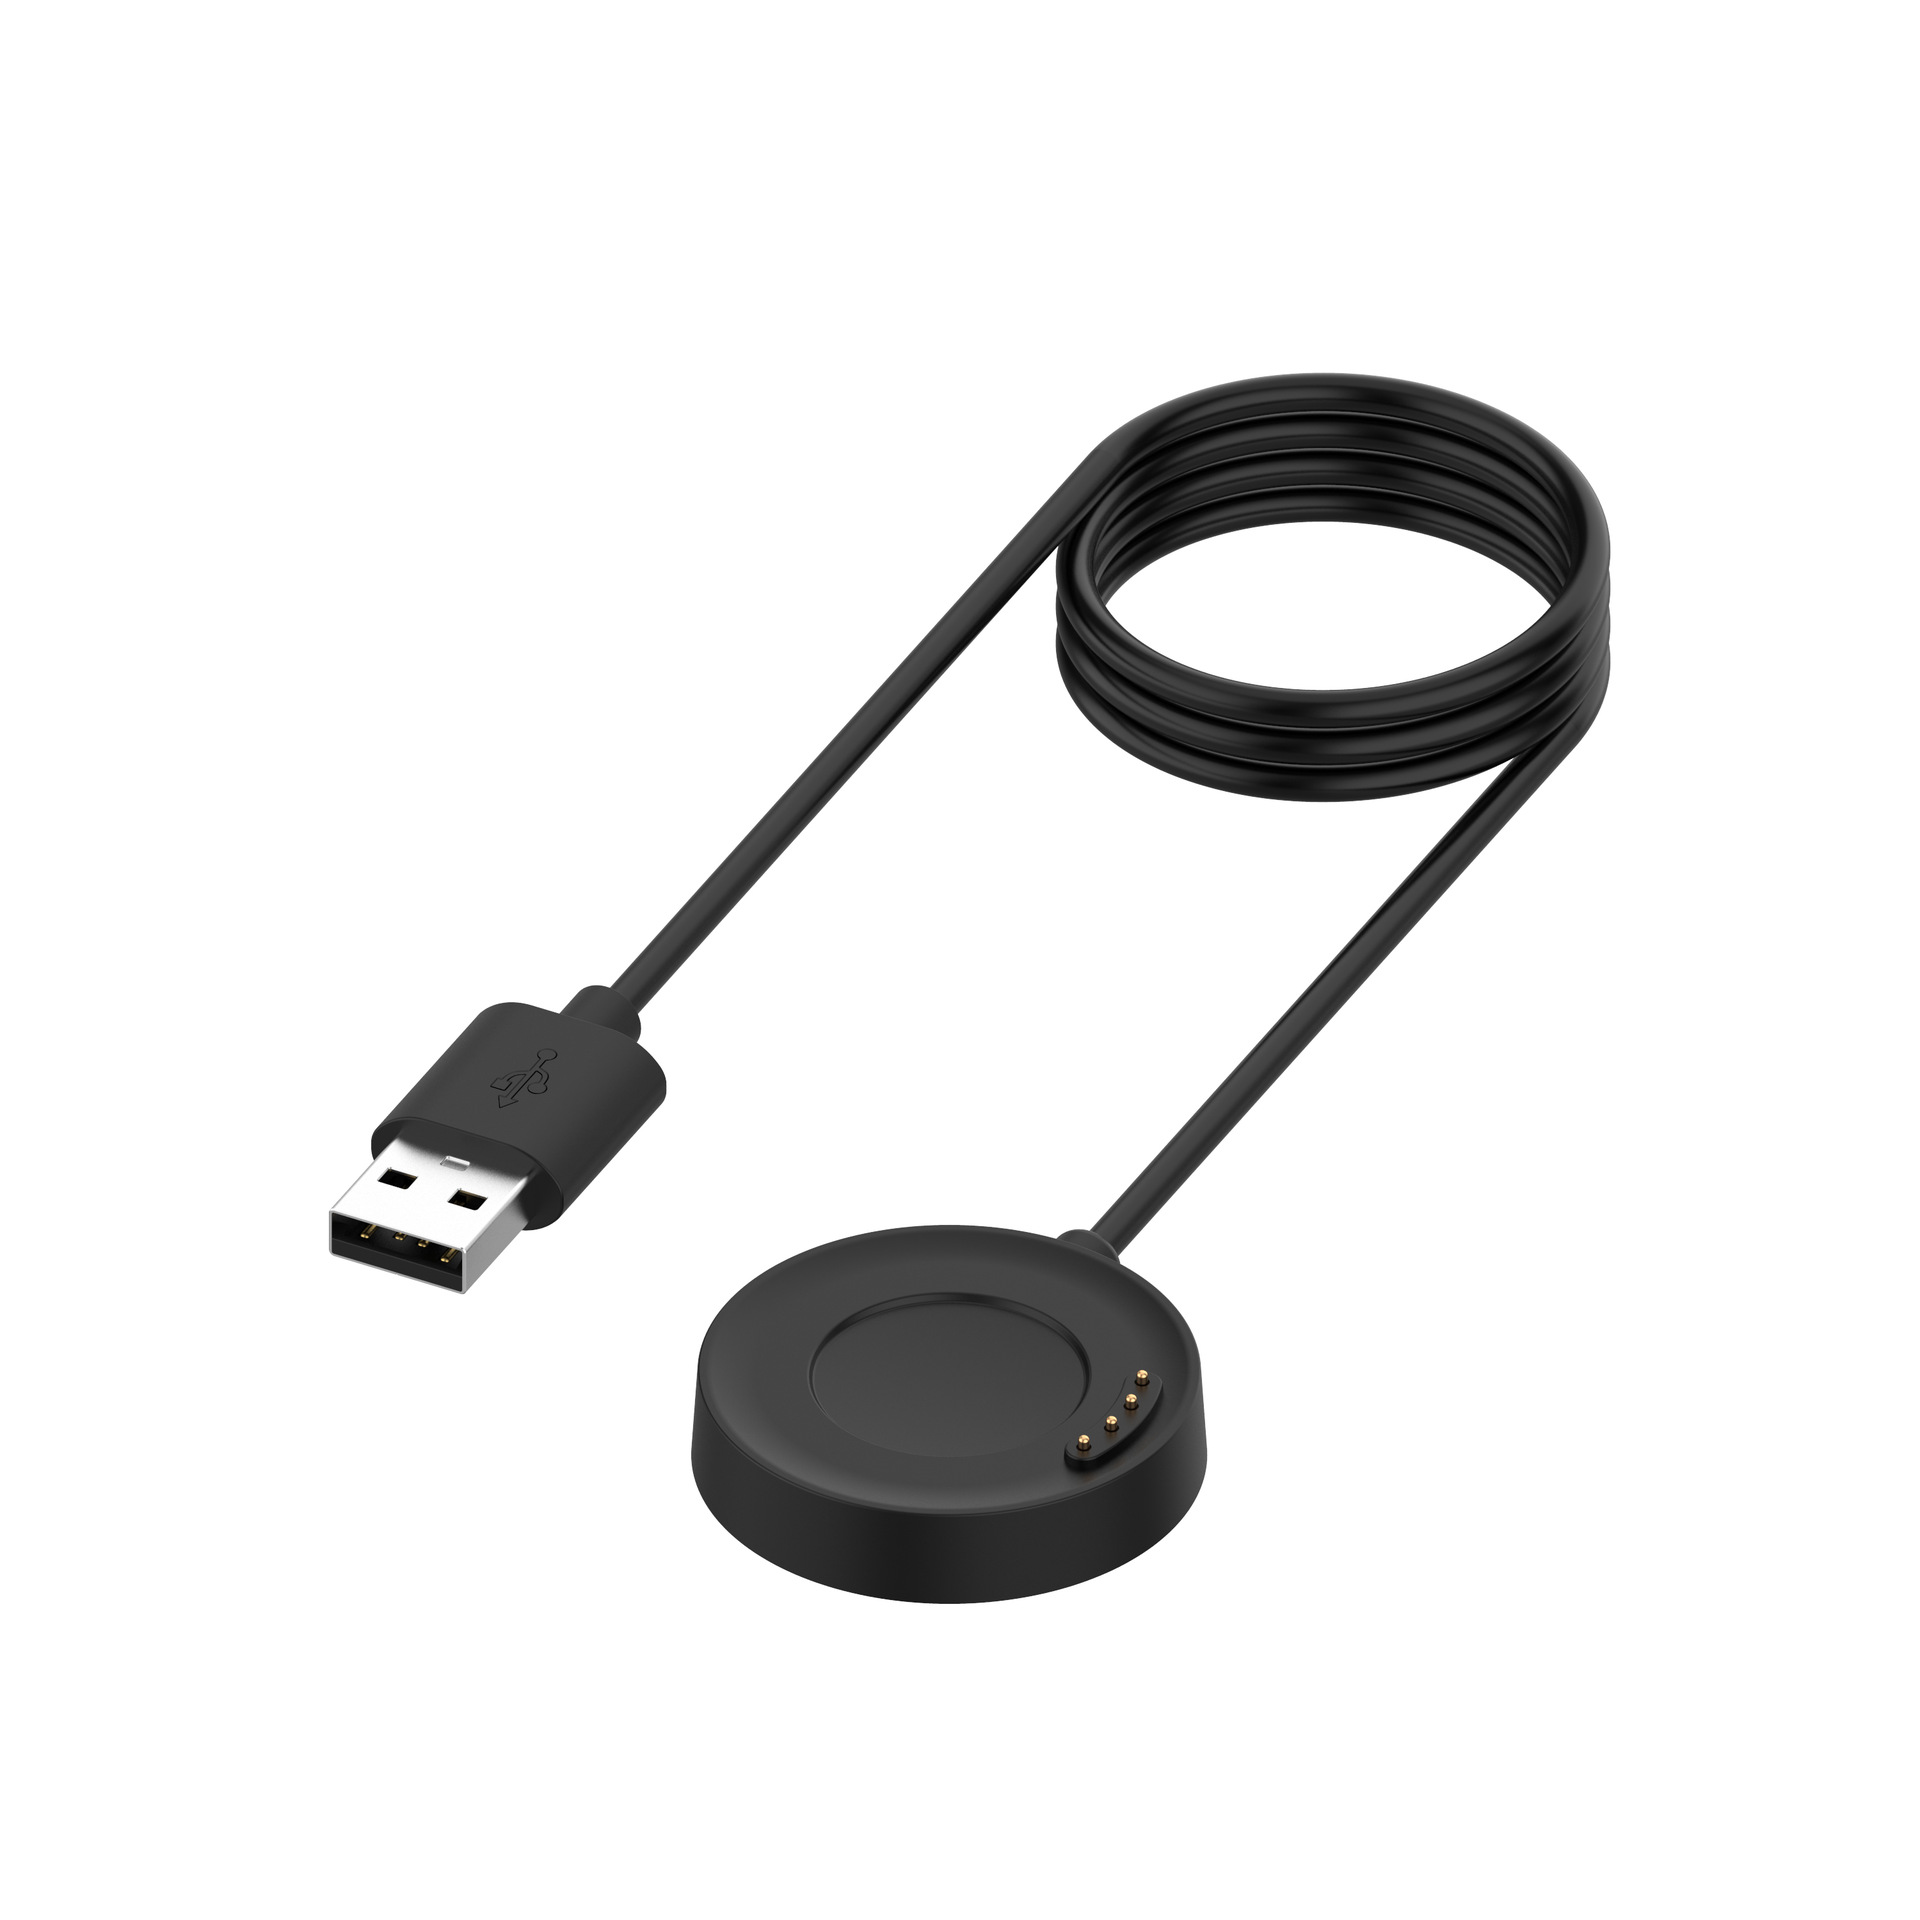 Bakeey-1M-TPU-Watch-Cable-Magnetic-Charger-Cable-for-Amazfit-stratos-3-Smart-Watch-Non-original-1621669-2